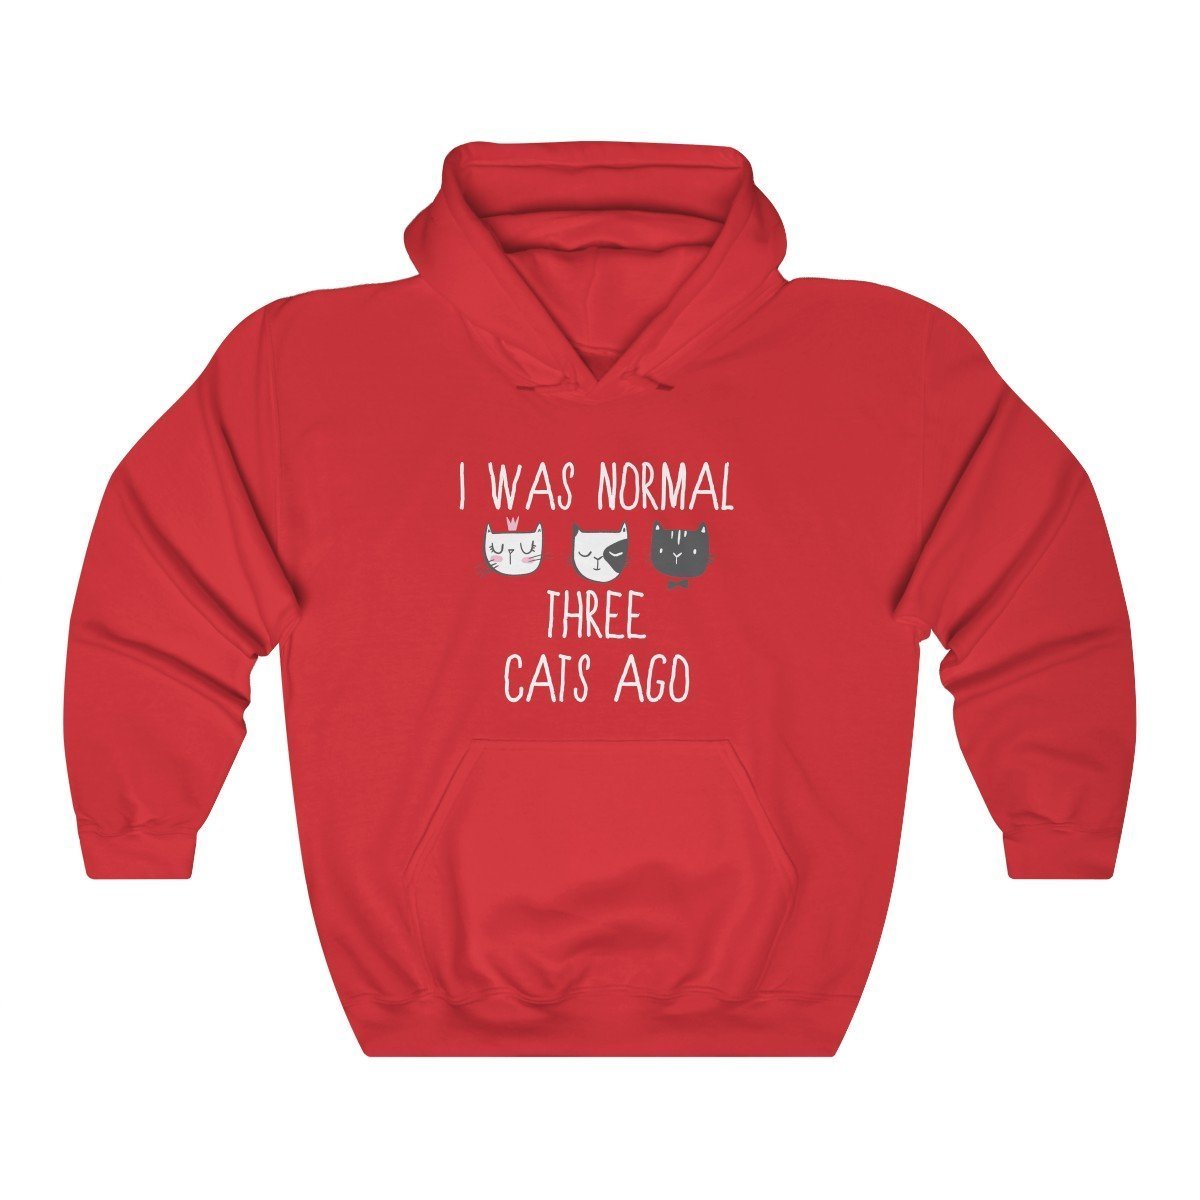 Funny Cat Sweatshirts for Cat Lovers, I Was Normal Three Cats Ago Cat Sweater for Women